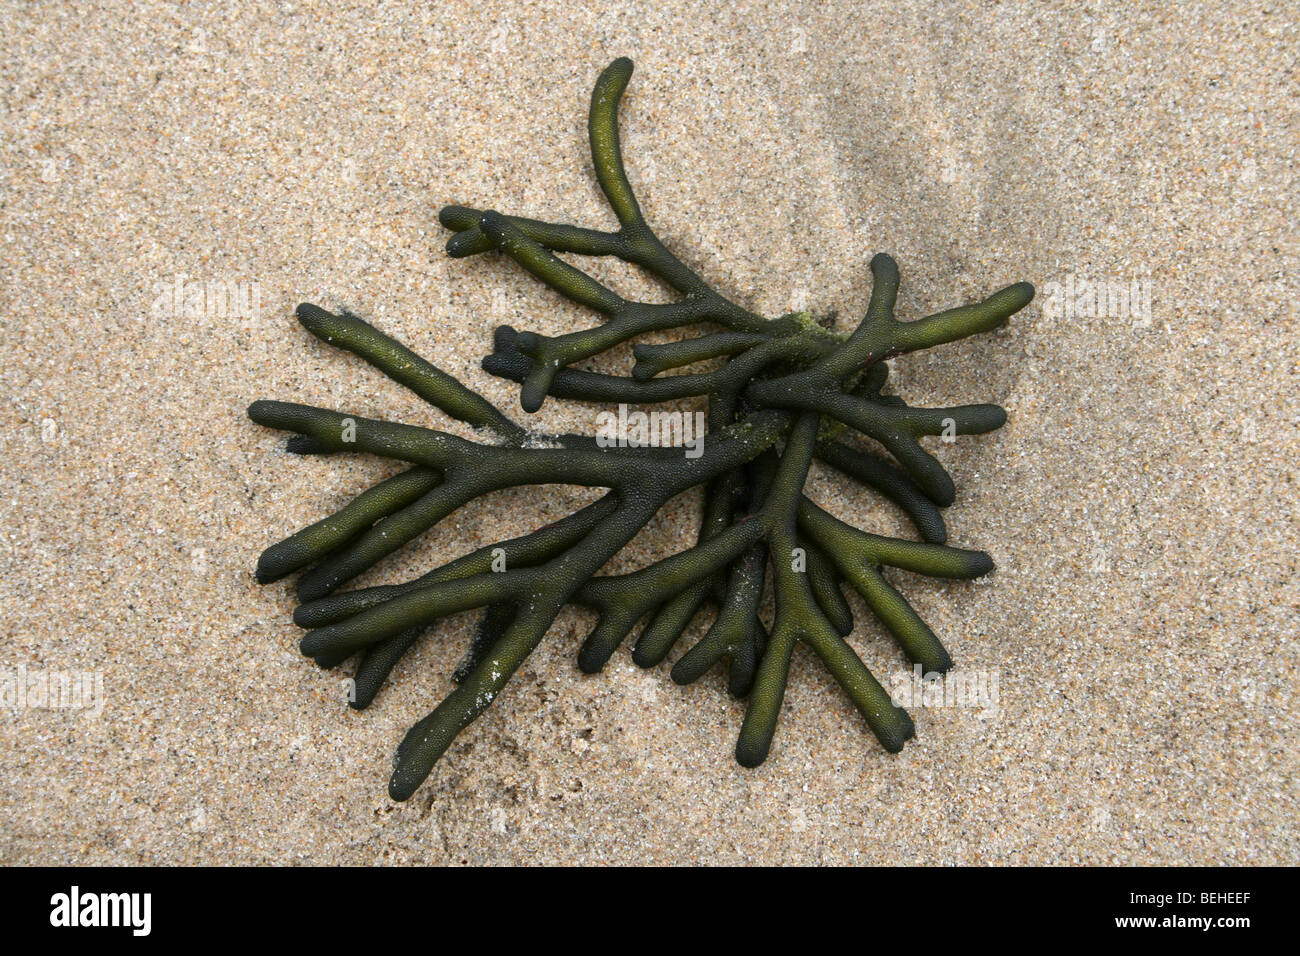 Seaweed Codium fragile Washed Up On The Beach At Kei Mouth, Eastern Cape Province, South Africa Stock Photo